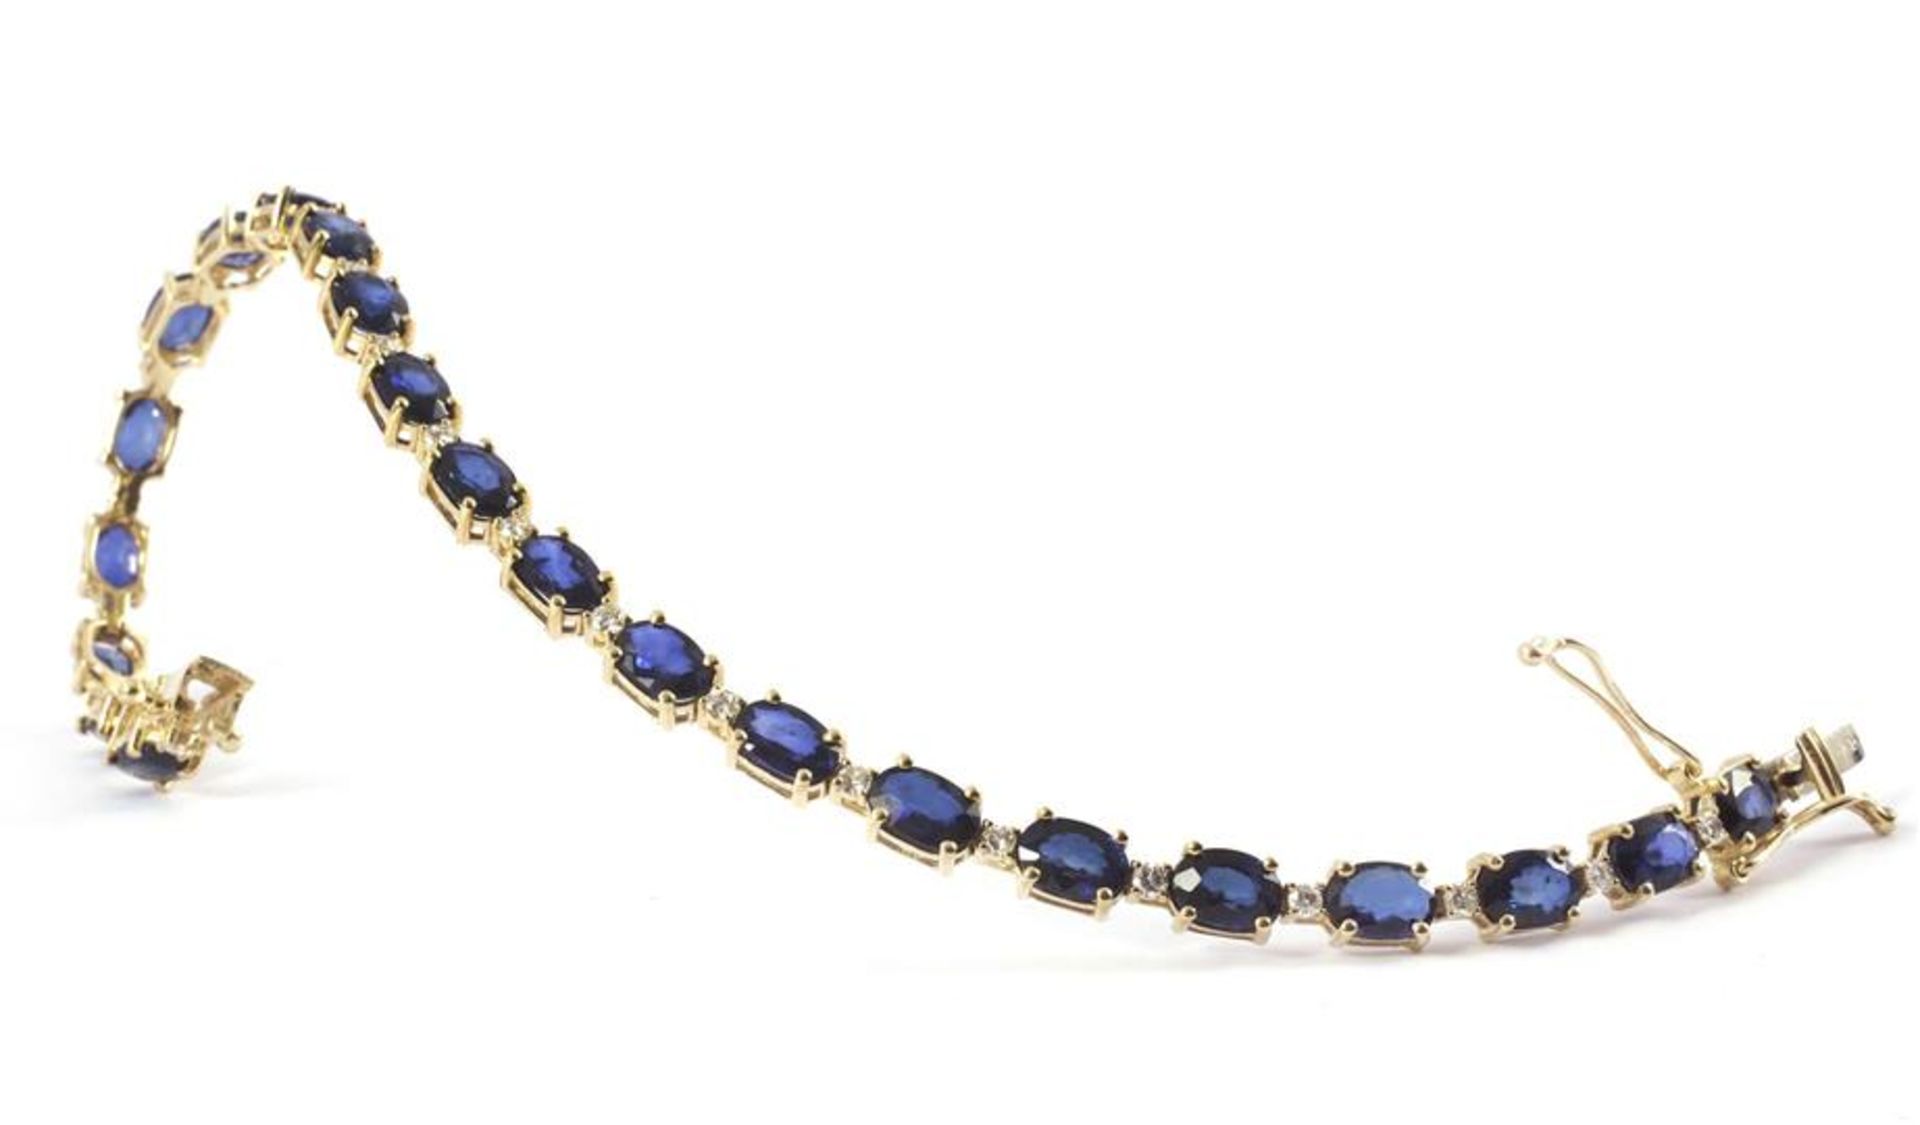 Gold fantasy bracelet, 18 krt., Set with sapphire approx. 11.00 ct. And brilliant cut diamond